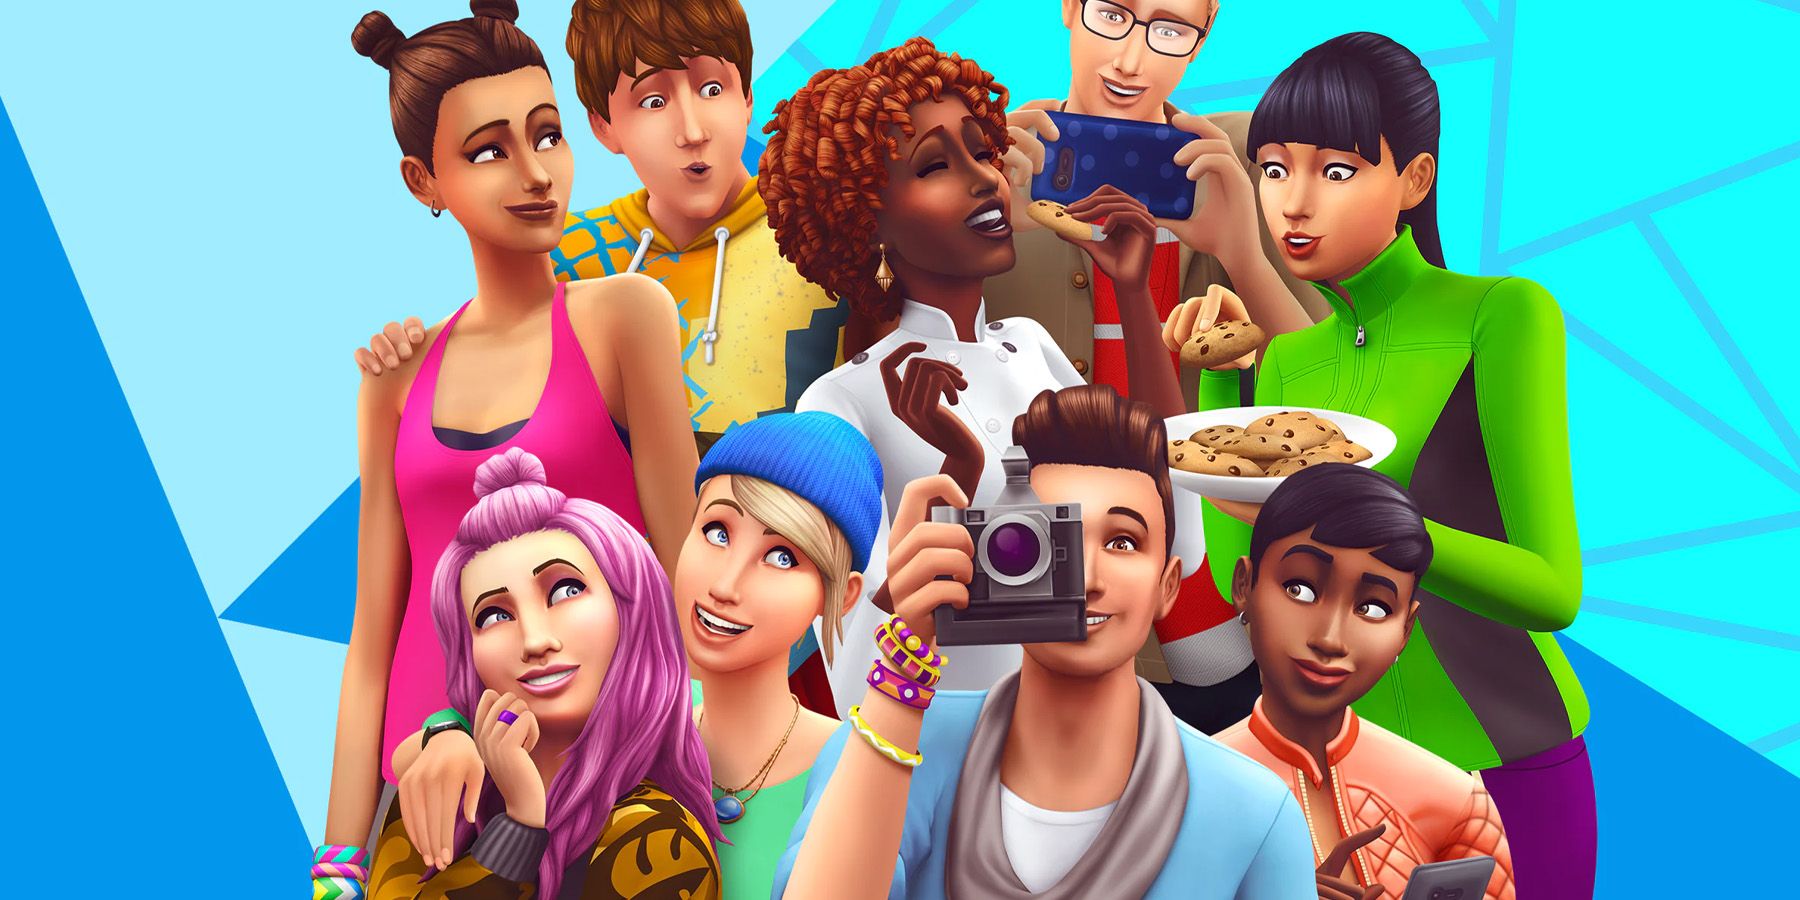 Several people from The Sims 4